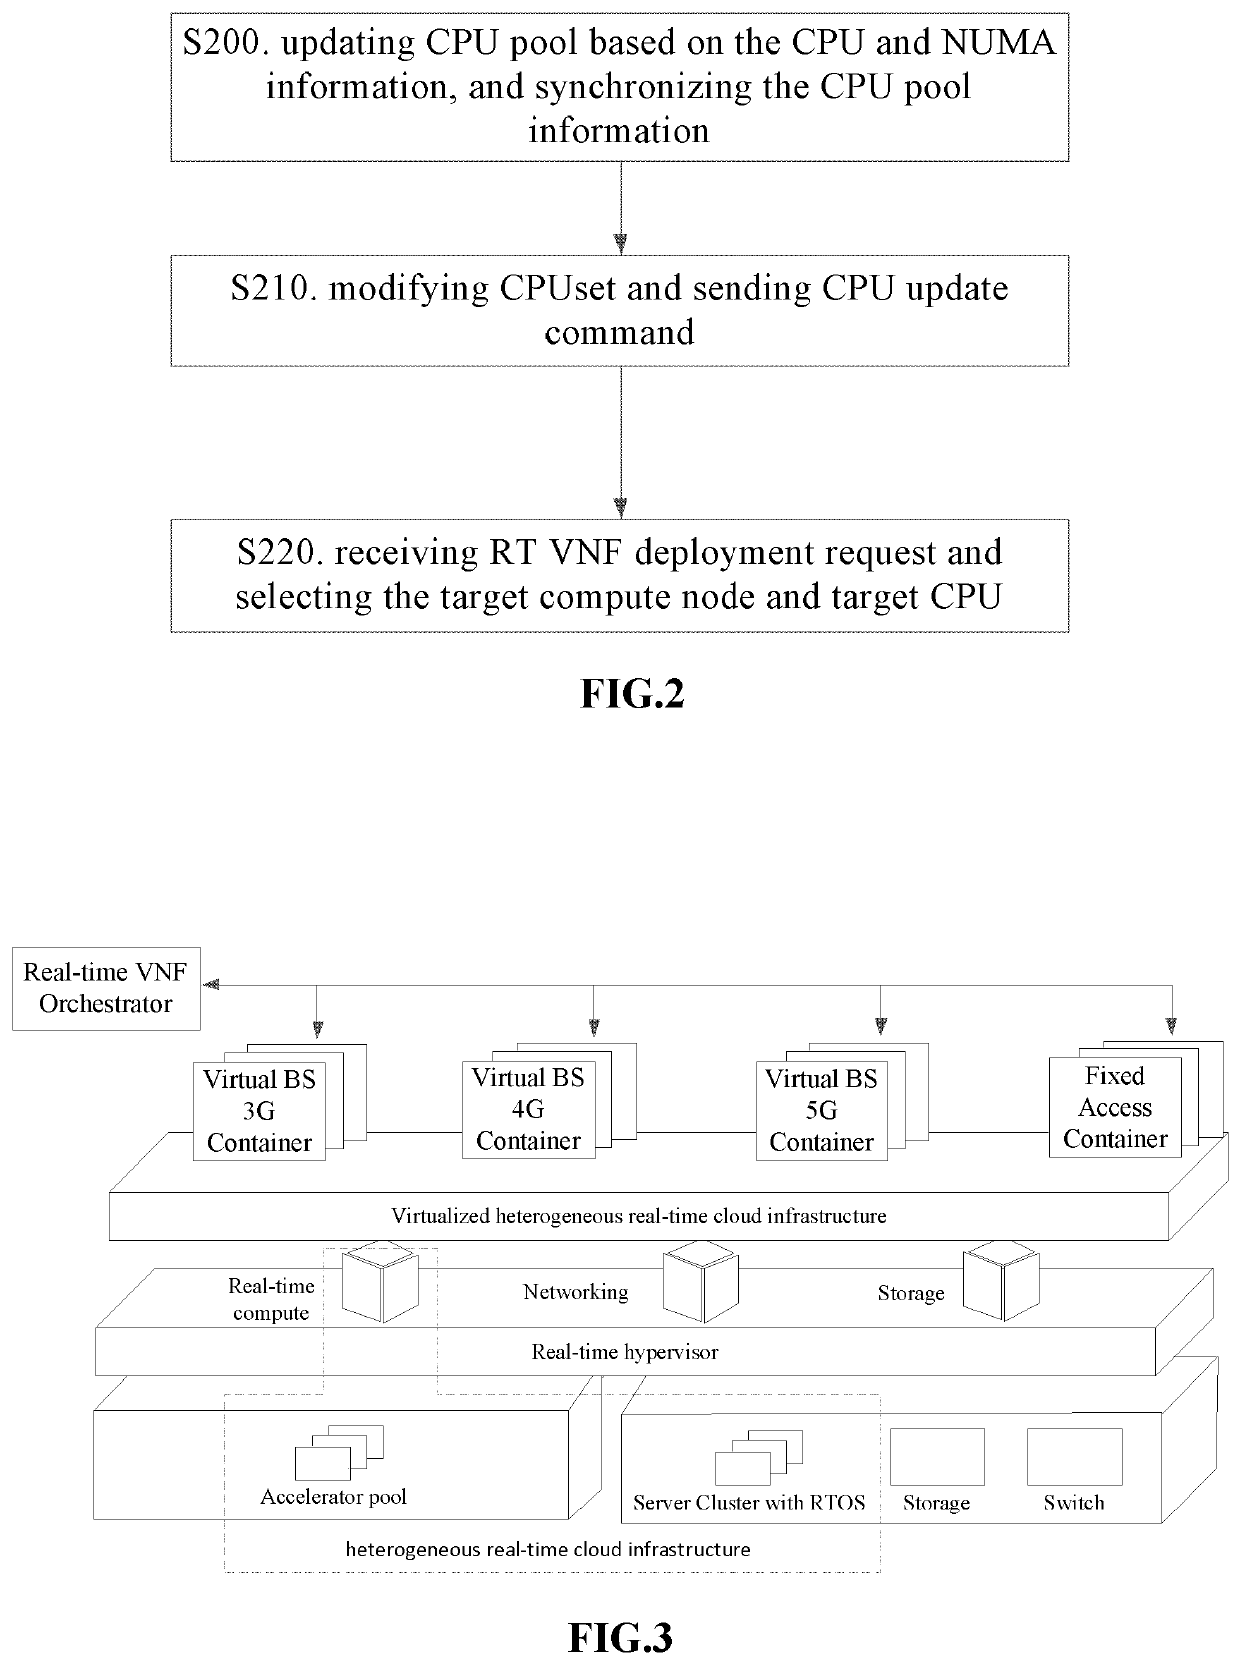 A method, apparatus and system for real-time virtual network function orchestration